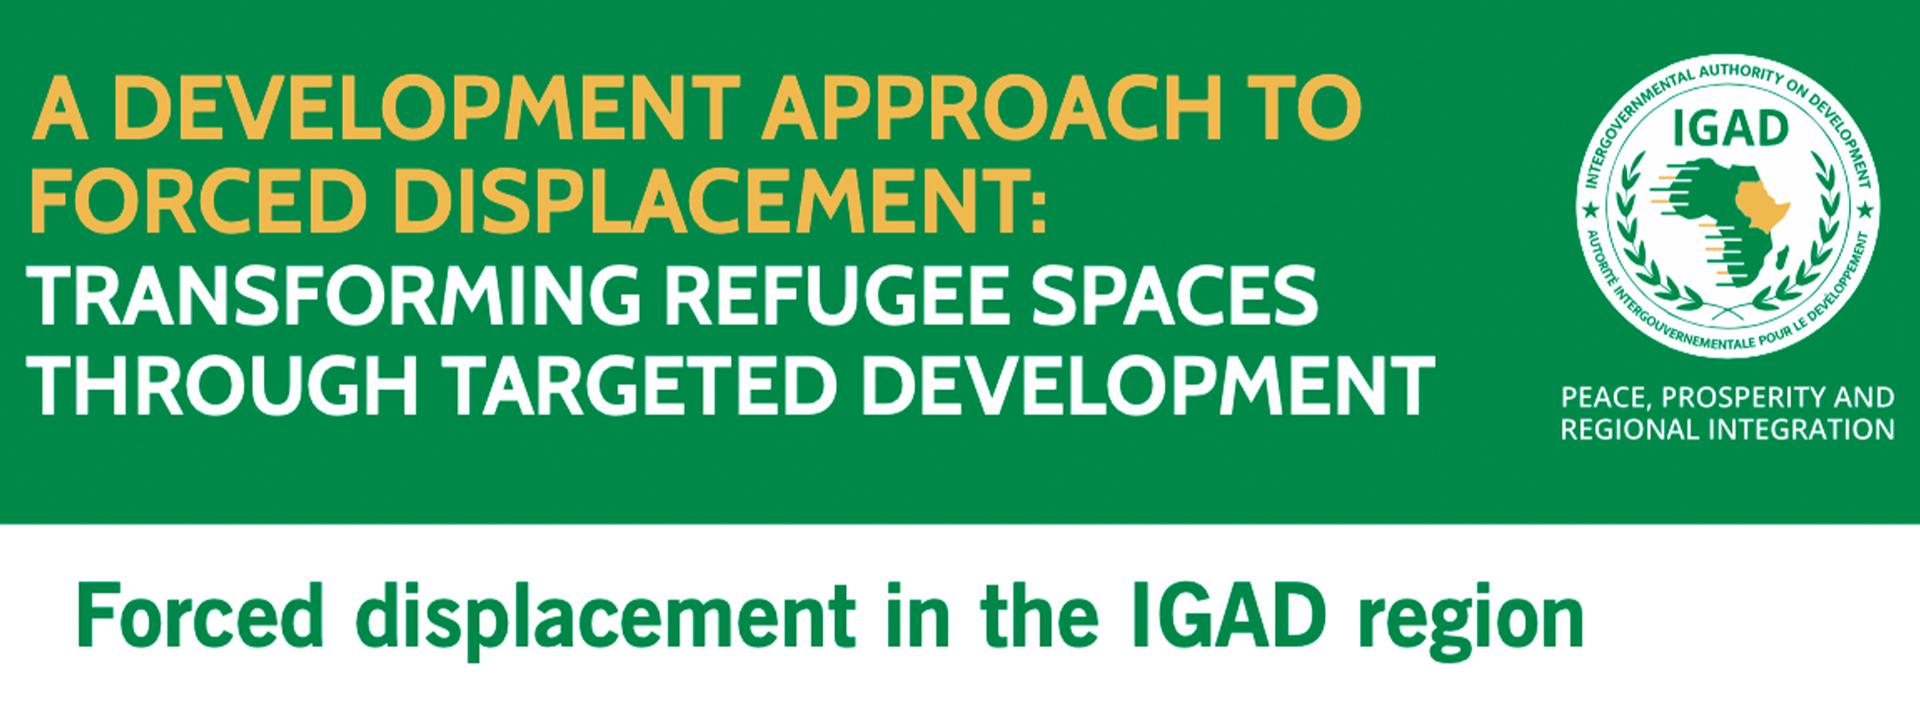 A Development Approach to Forced Displacement: Transforming Refugee Spaces Through Targeted Development